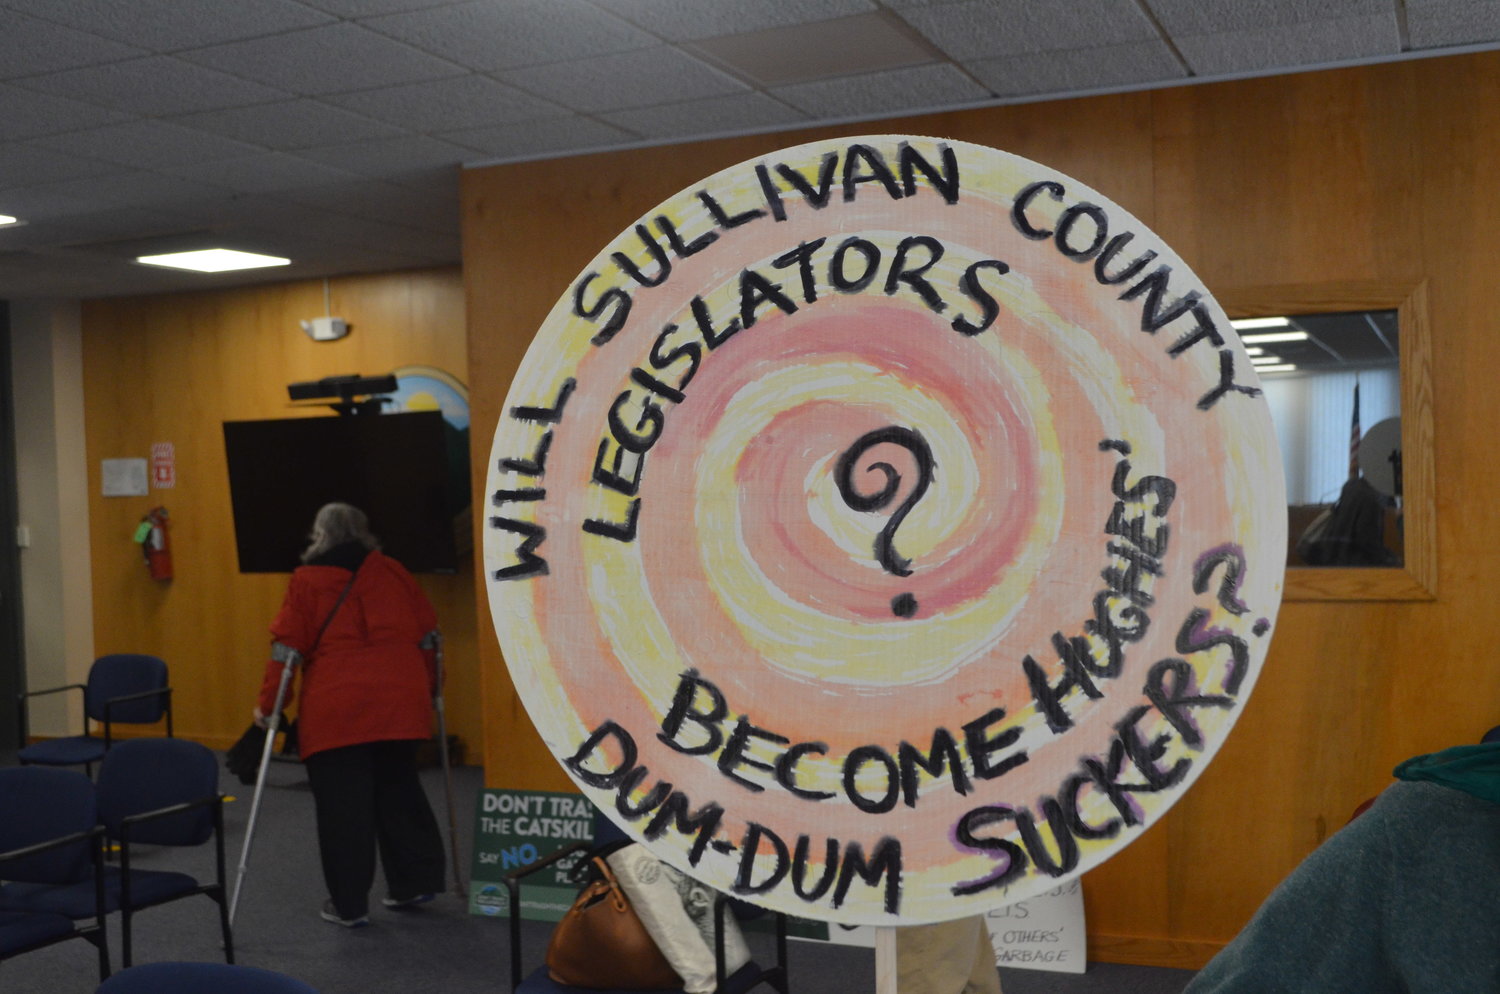 A sign held at the November 17 meeting of the Sullivan County Legislature asks if legislators will become “suckers” for Hughes Energy’s proposal.